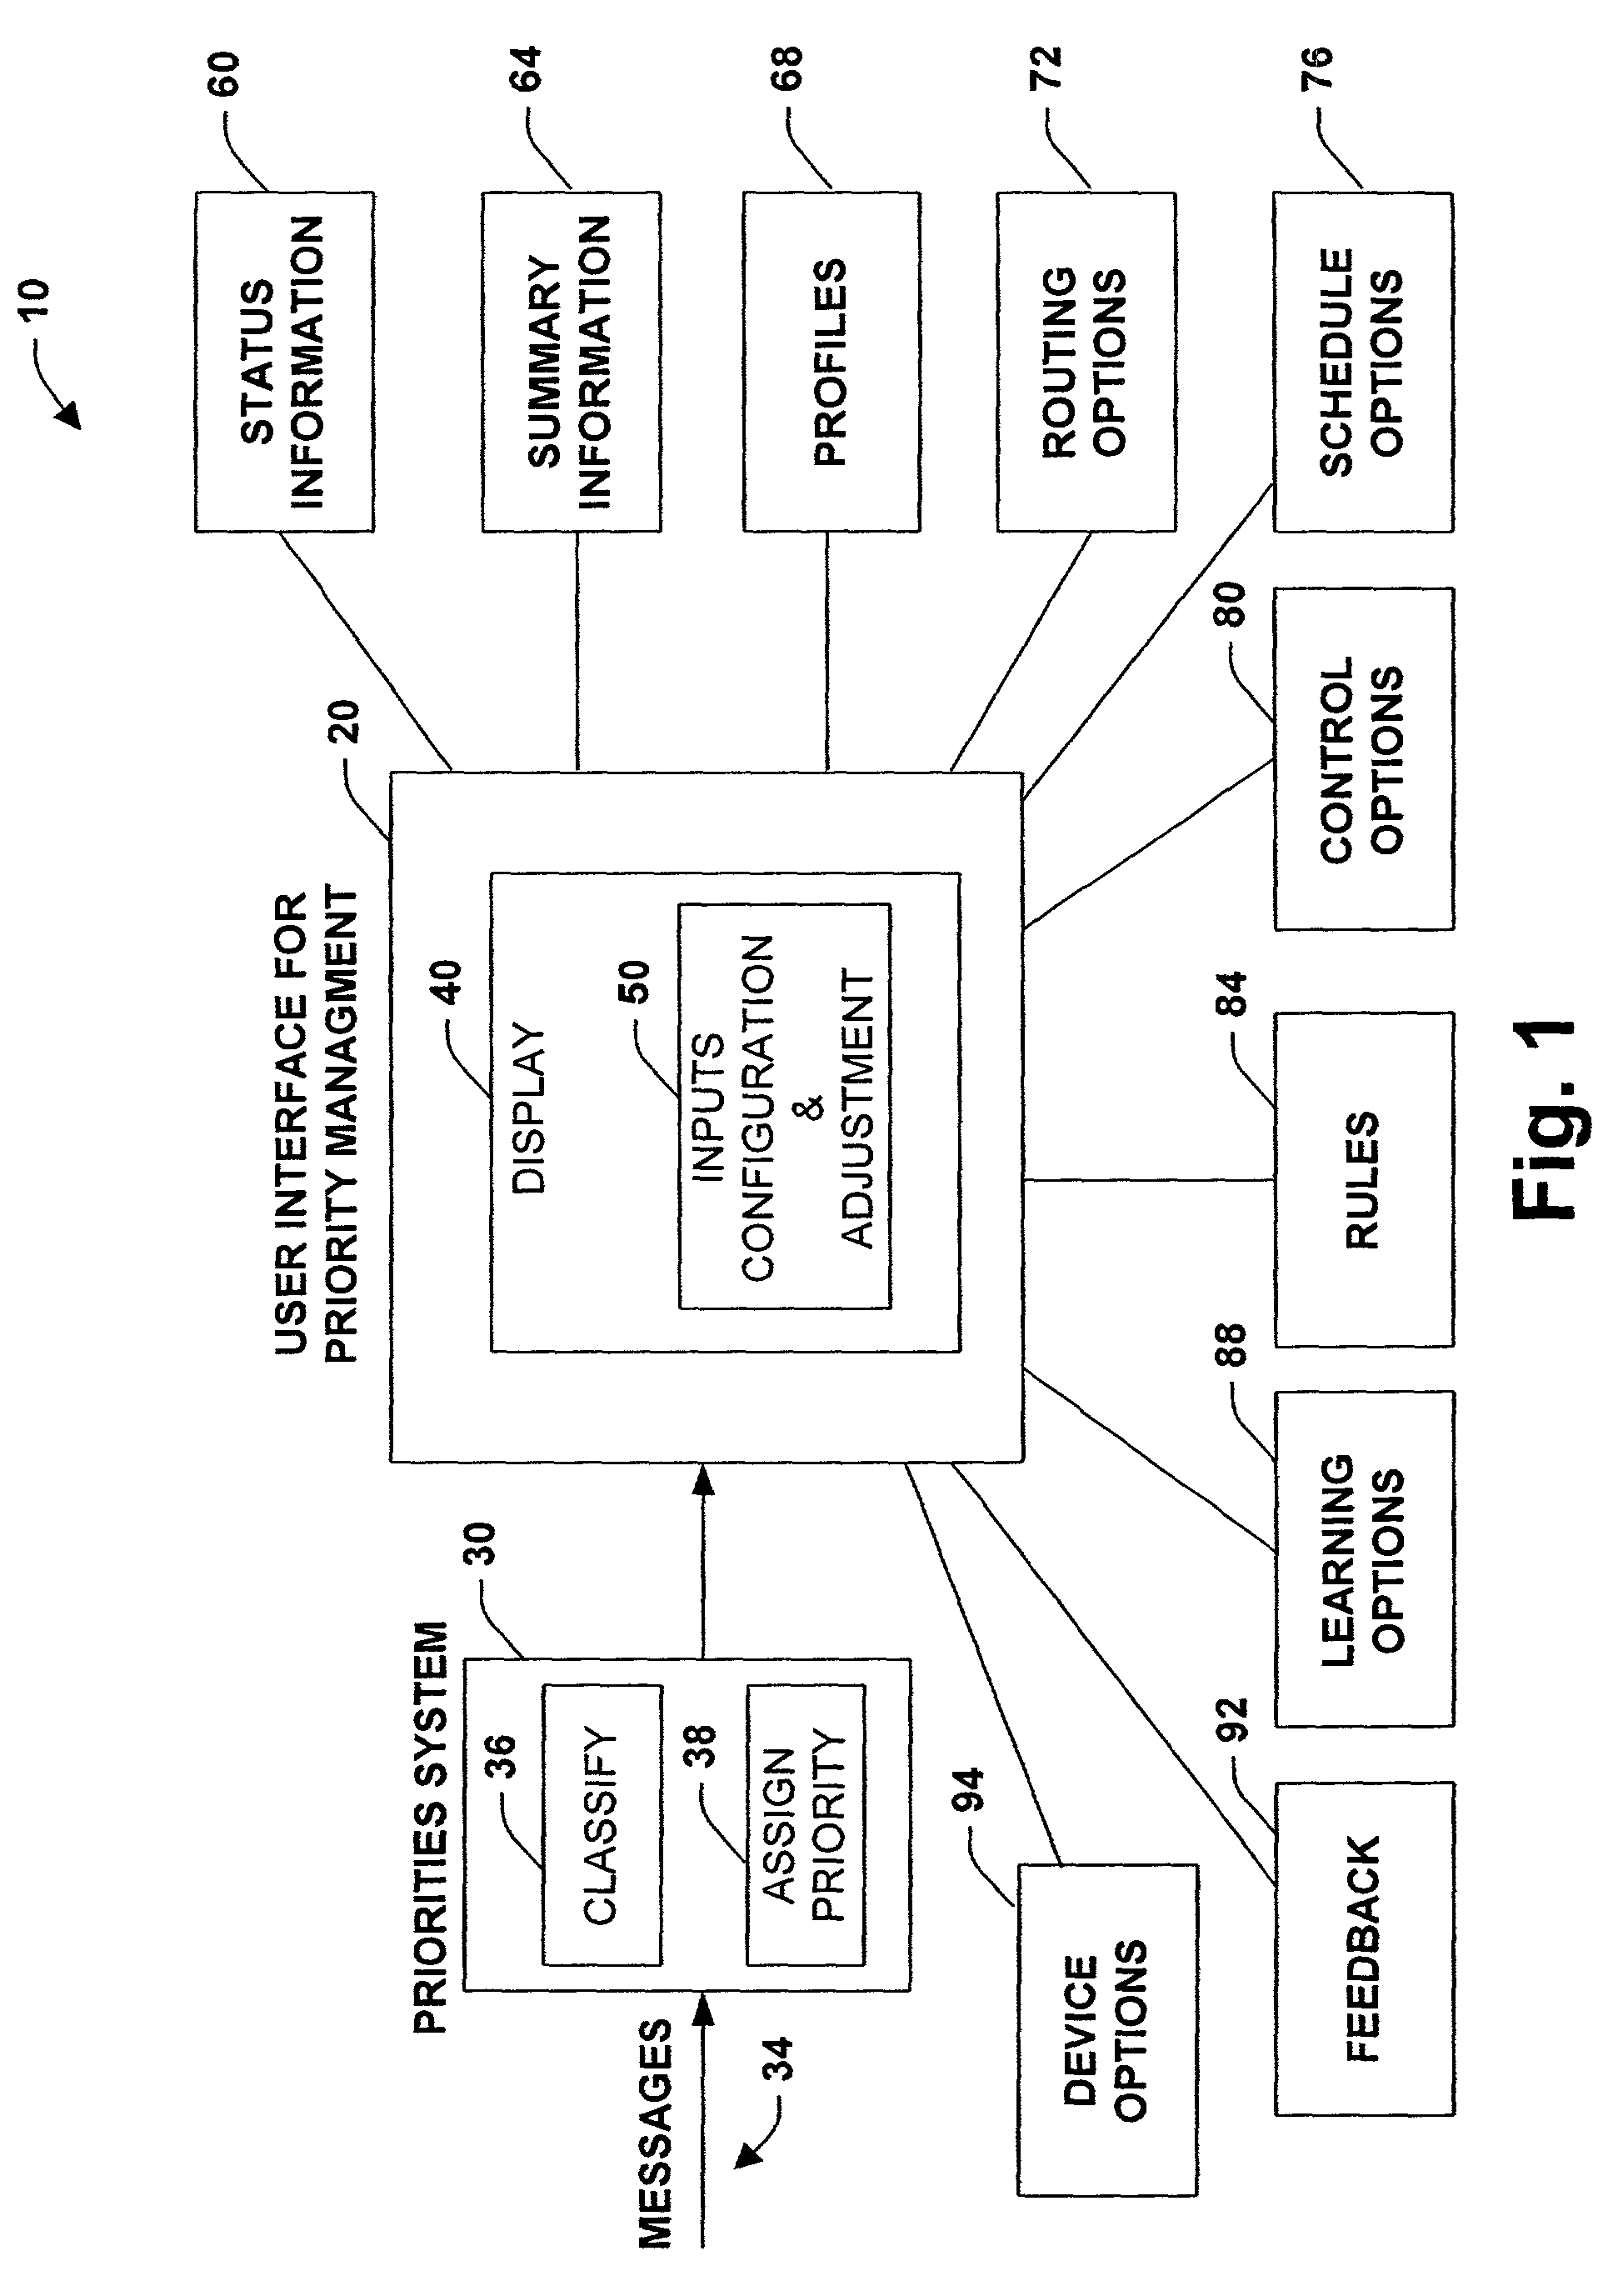 Controls and displays for acquiring preferences, inspecting behavior, and guiding the learning and decision policies of an adaptive communications prioritization and routing system